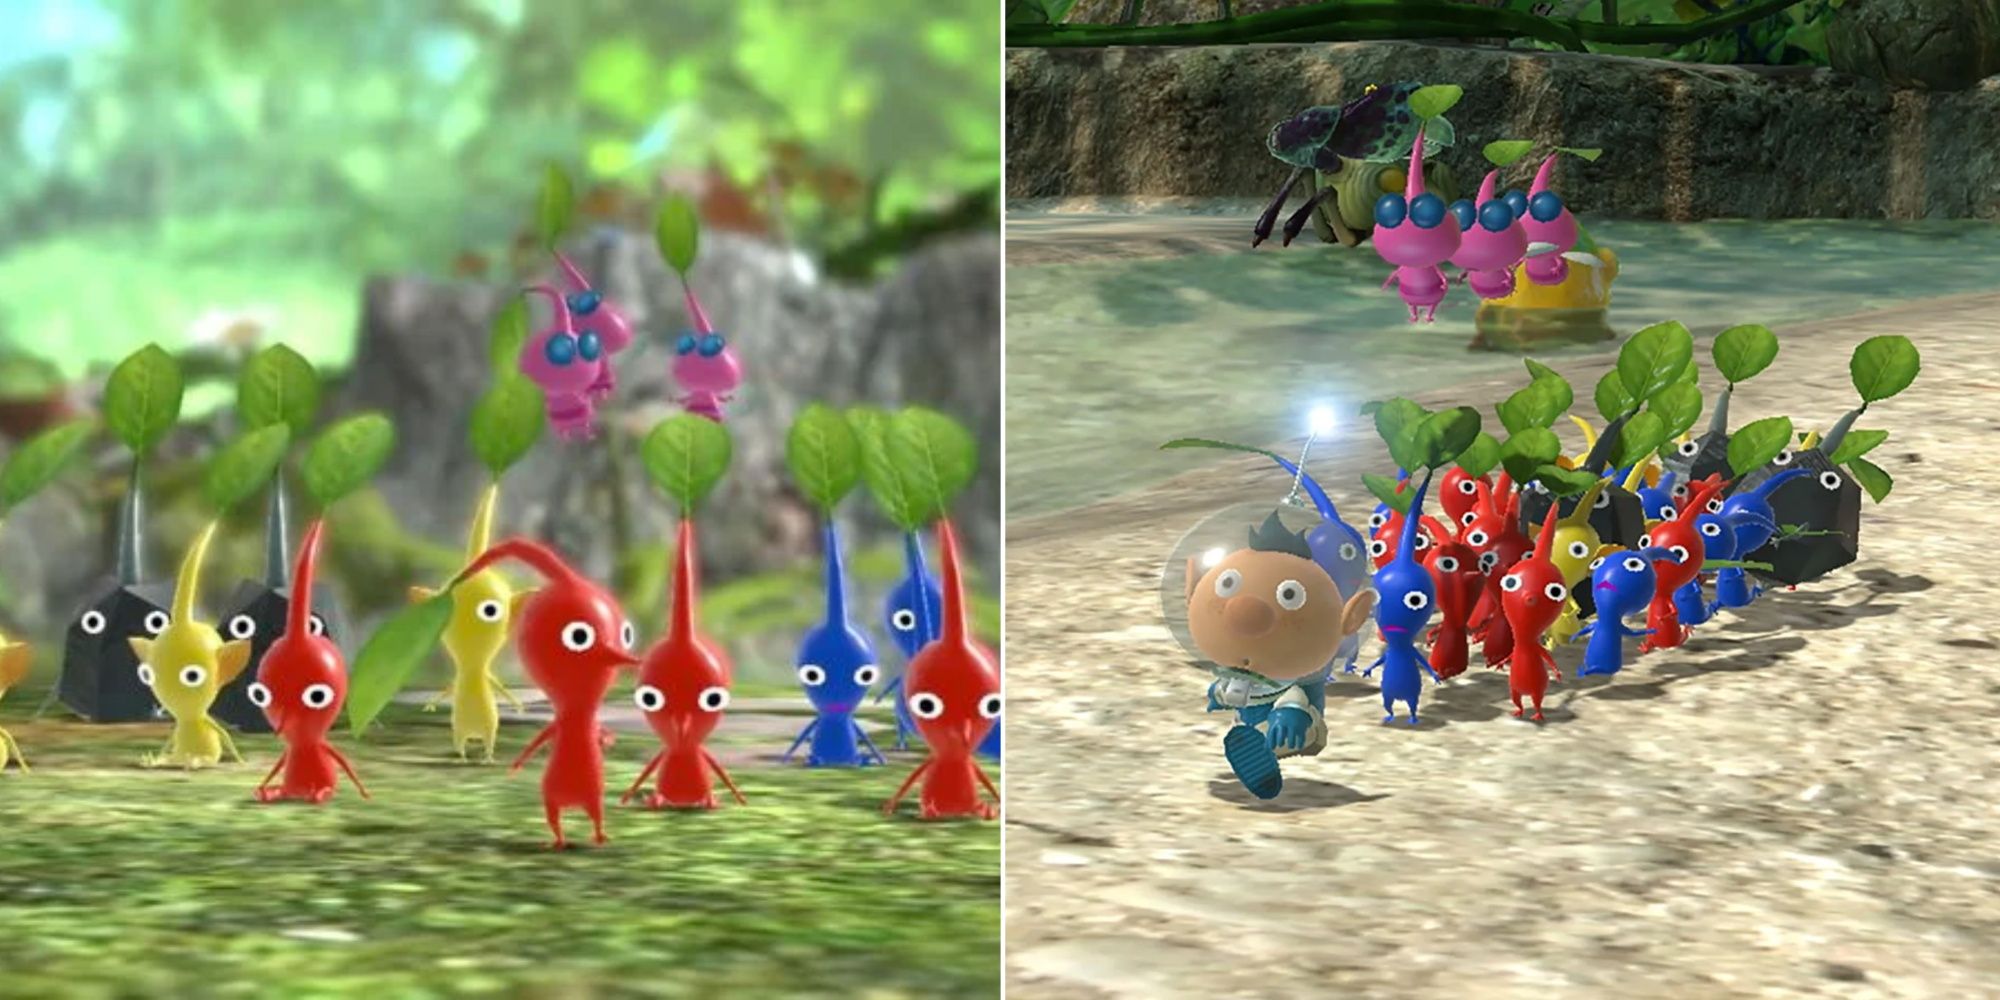  Promo Image From Pikmin 3 Deluxe, And Gameplay Image From Pikmin 4